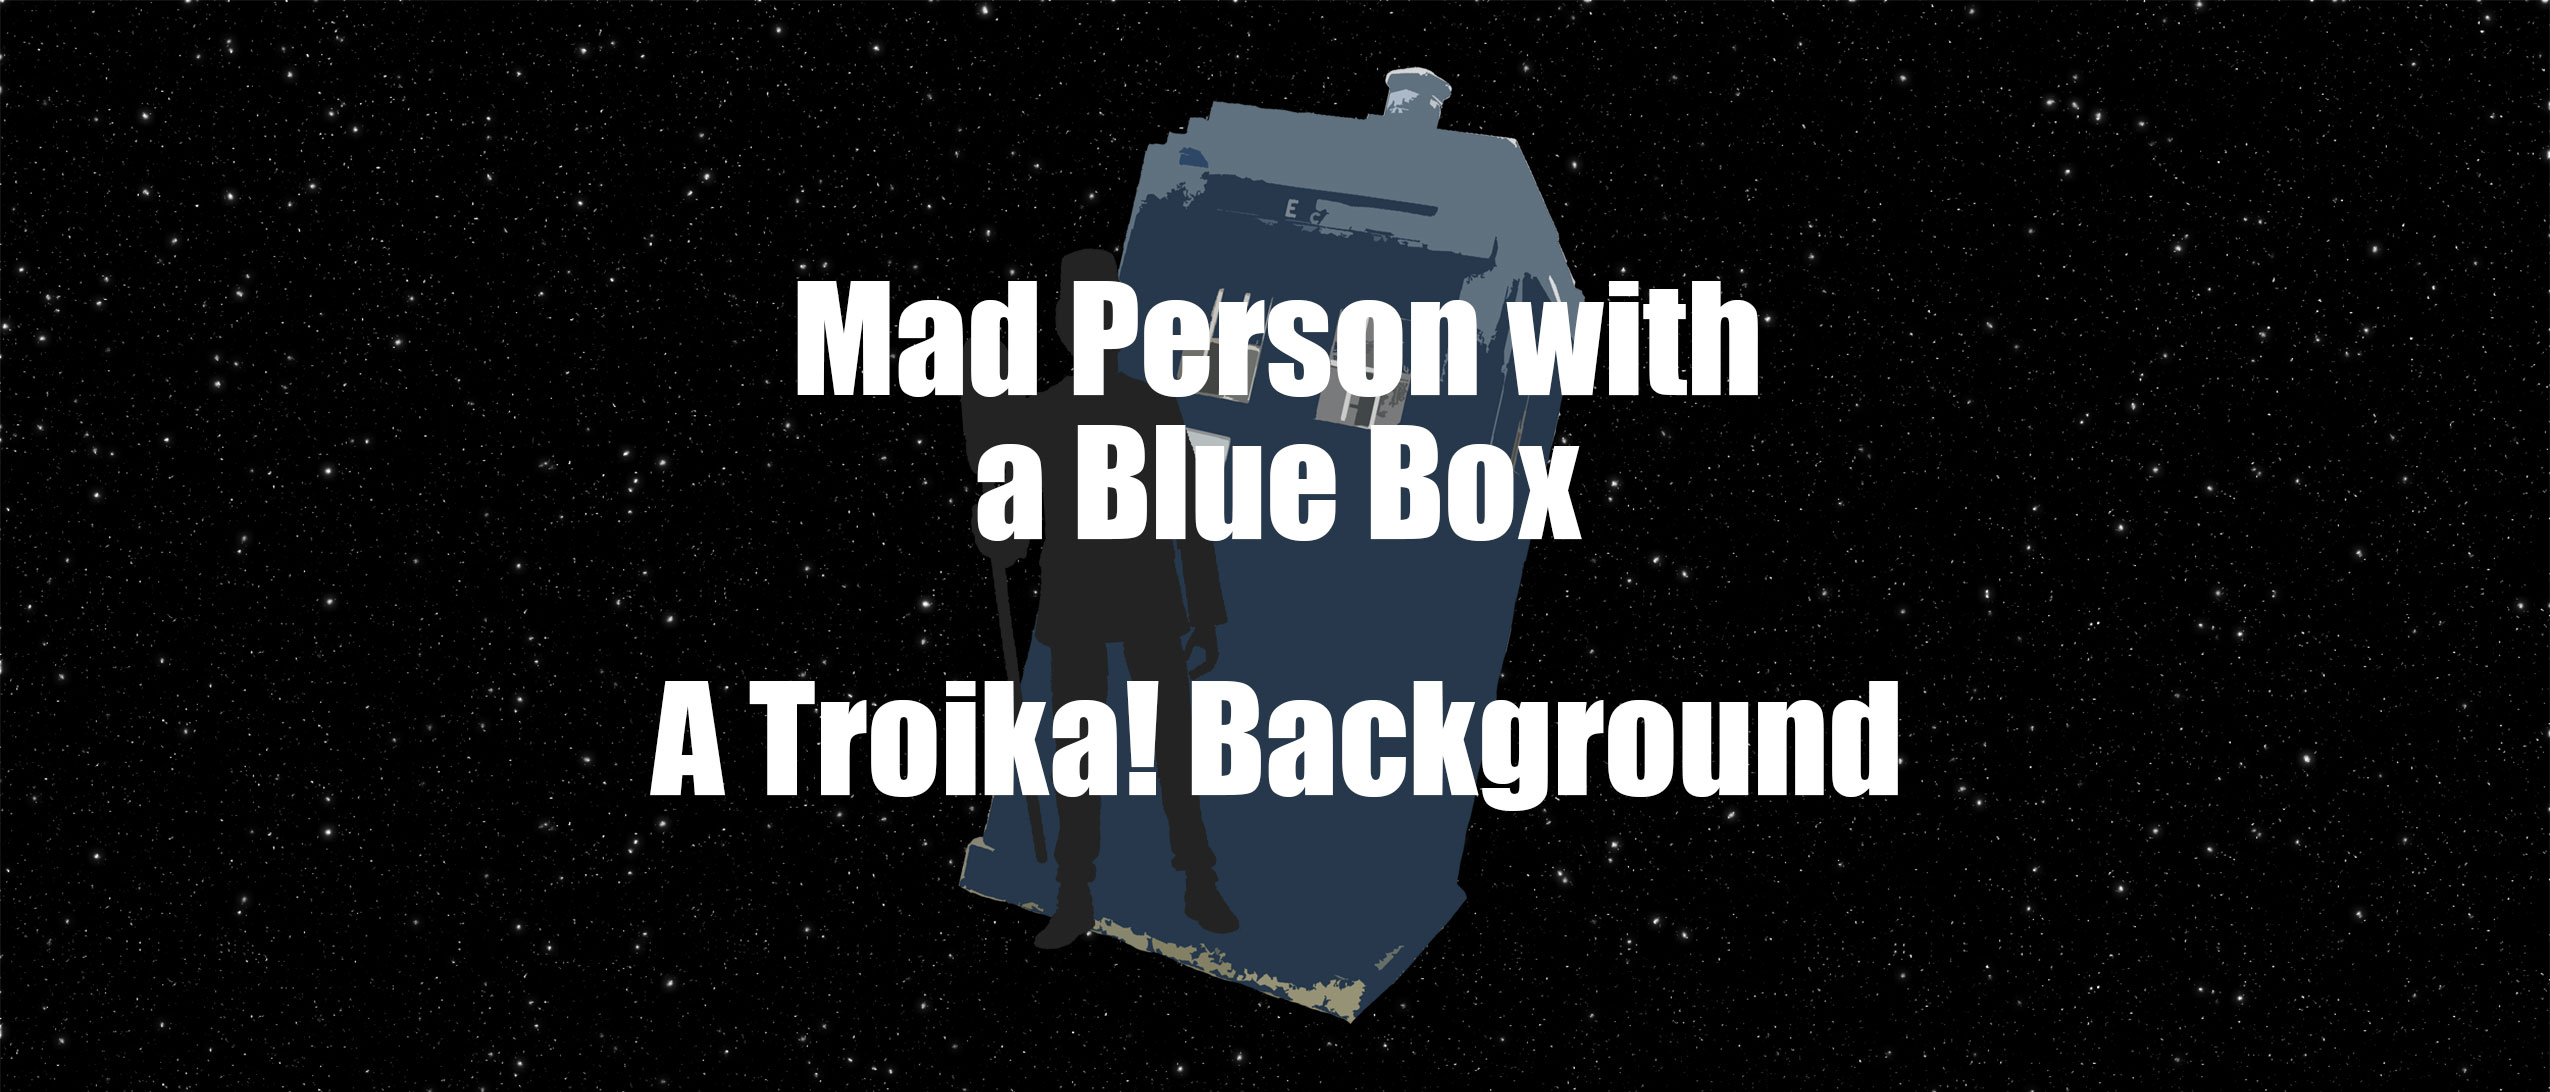 Mad Person with a Blue Box - A Troika! Background